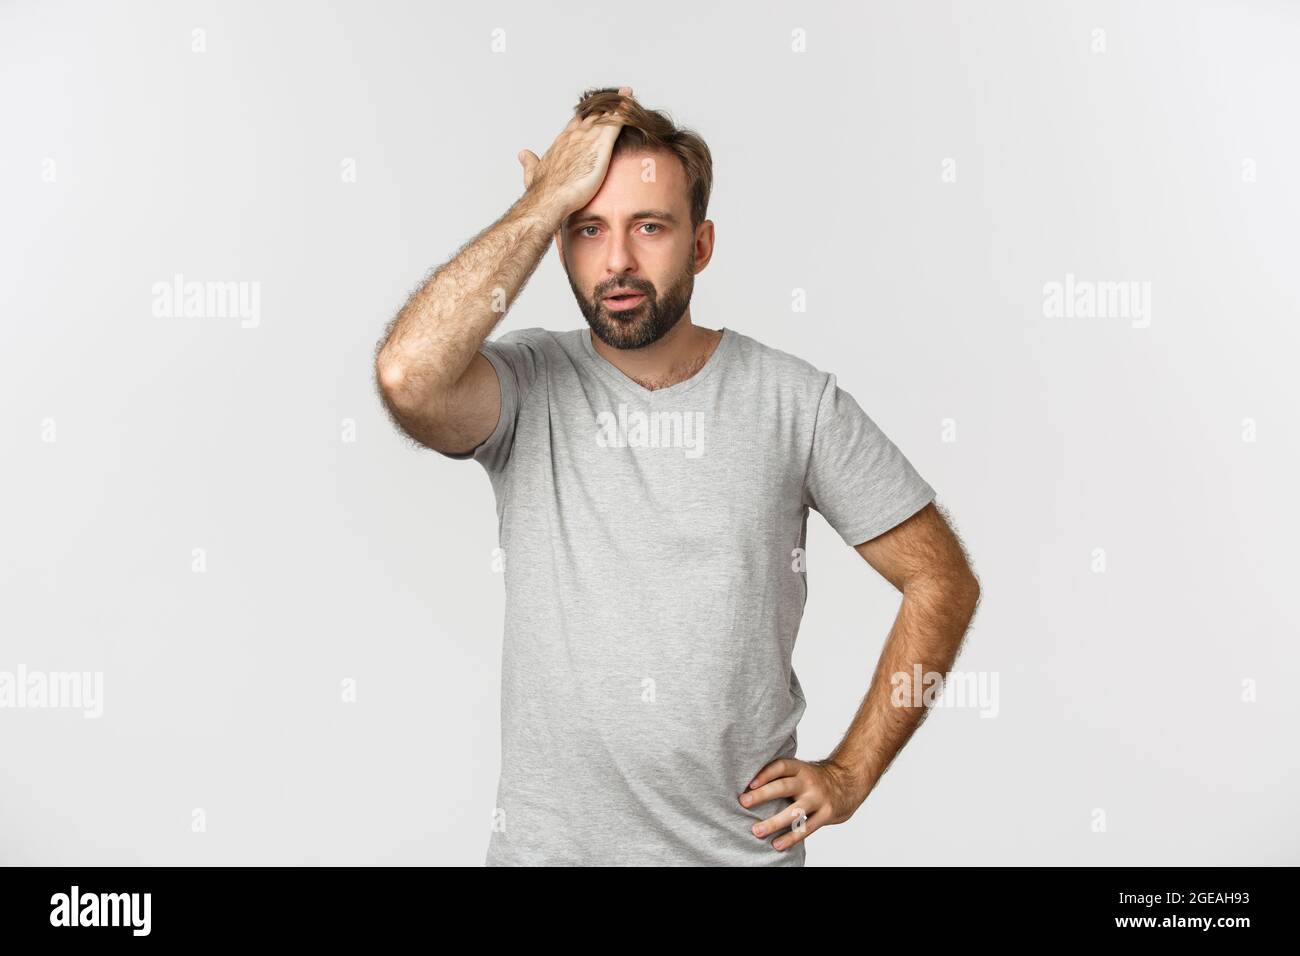 Troubled bearded man in gray t-shirt, slap forehead and sighing bothered by problem, standing over white background distressed Stock Photo